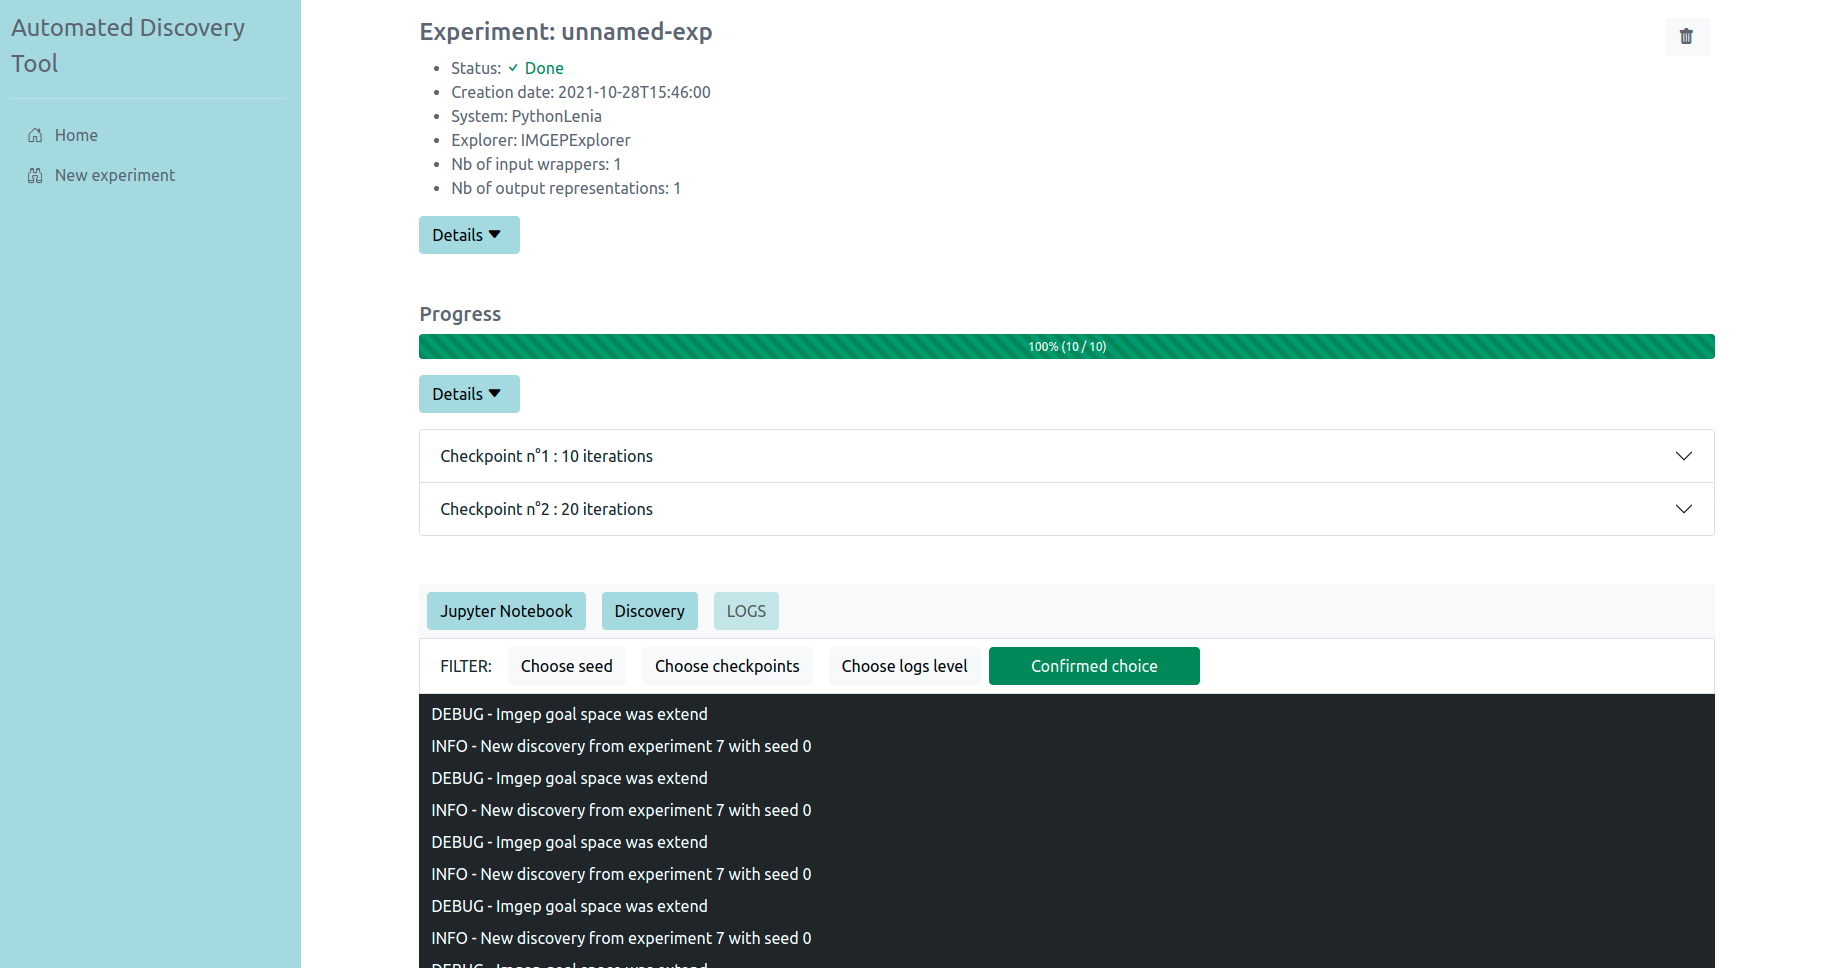 Screenshot of the interface allowing to monitor an experiment where users can see its progress.